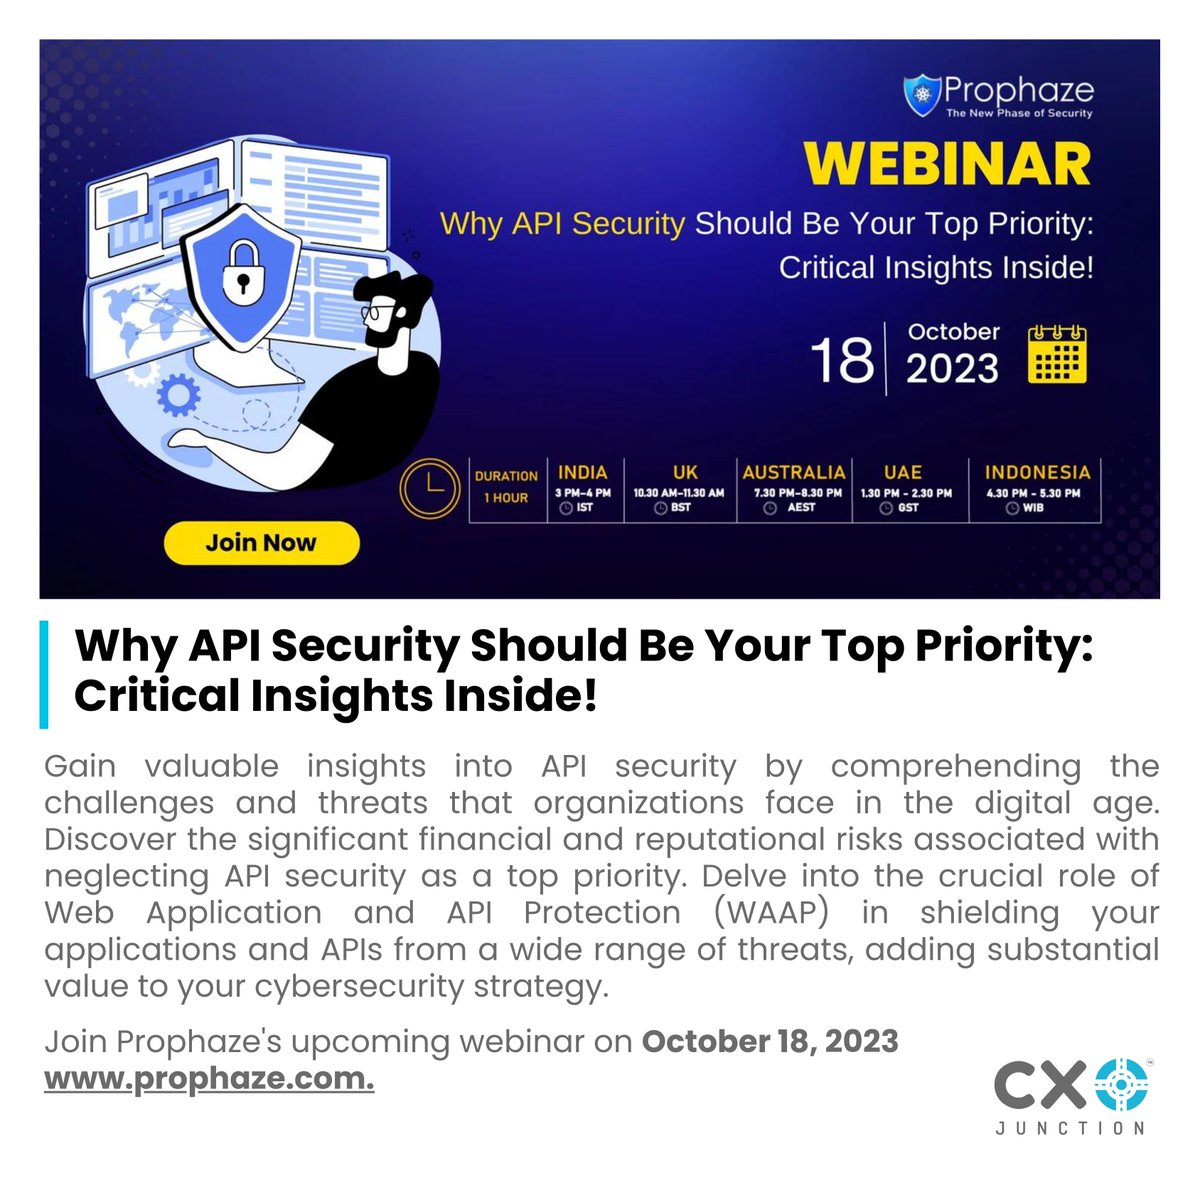 #industrynews #webinar 

Join @prophaze webinar on 'Why API Security Should Be Your Top Priority: Critical Insights Inside! on 18th October, 2023 at 03:00 PM [IST]

👉Register Now: landing.prophaze.com/live-webinar-2…

#cybersecurity #apisecurity #apiprotection #CXOJunction #registernow